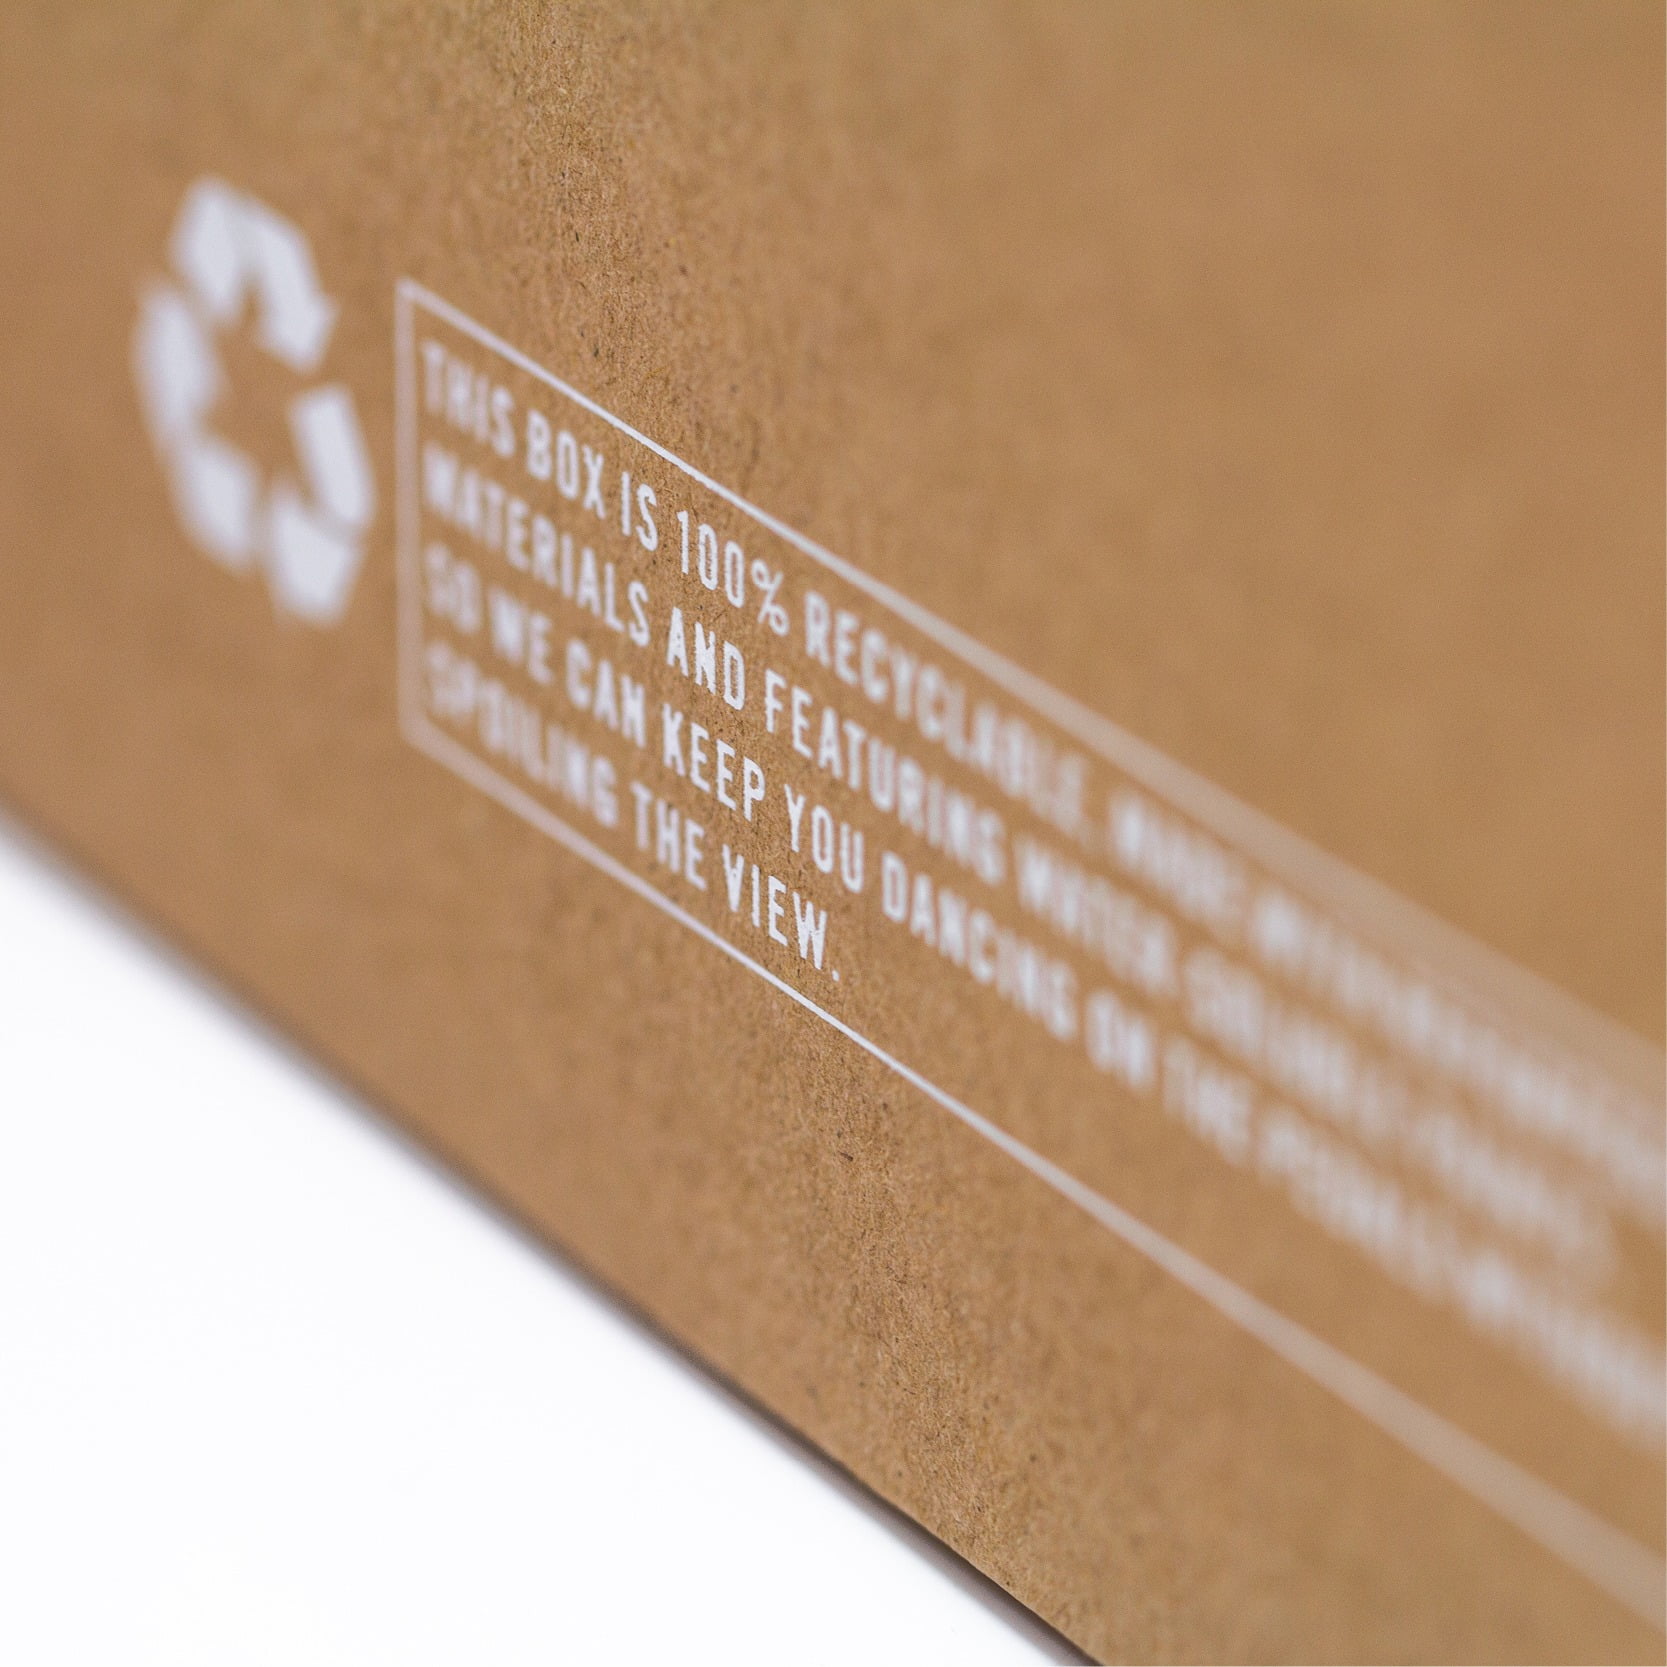 Box with recycling information printed on it